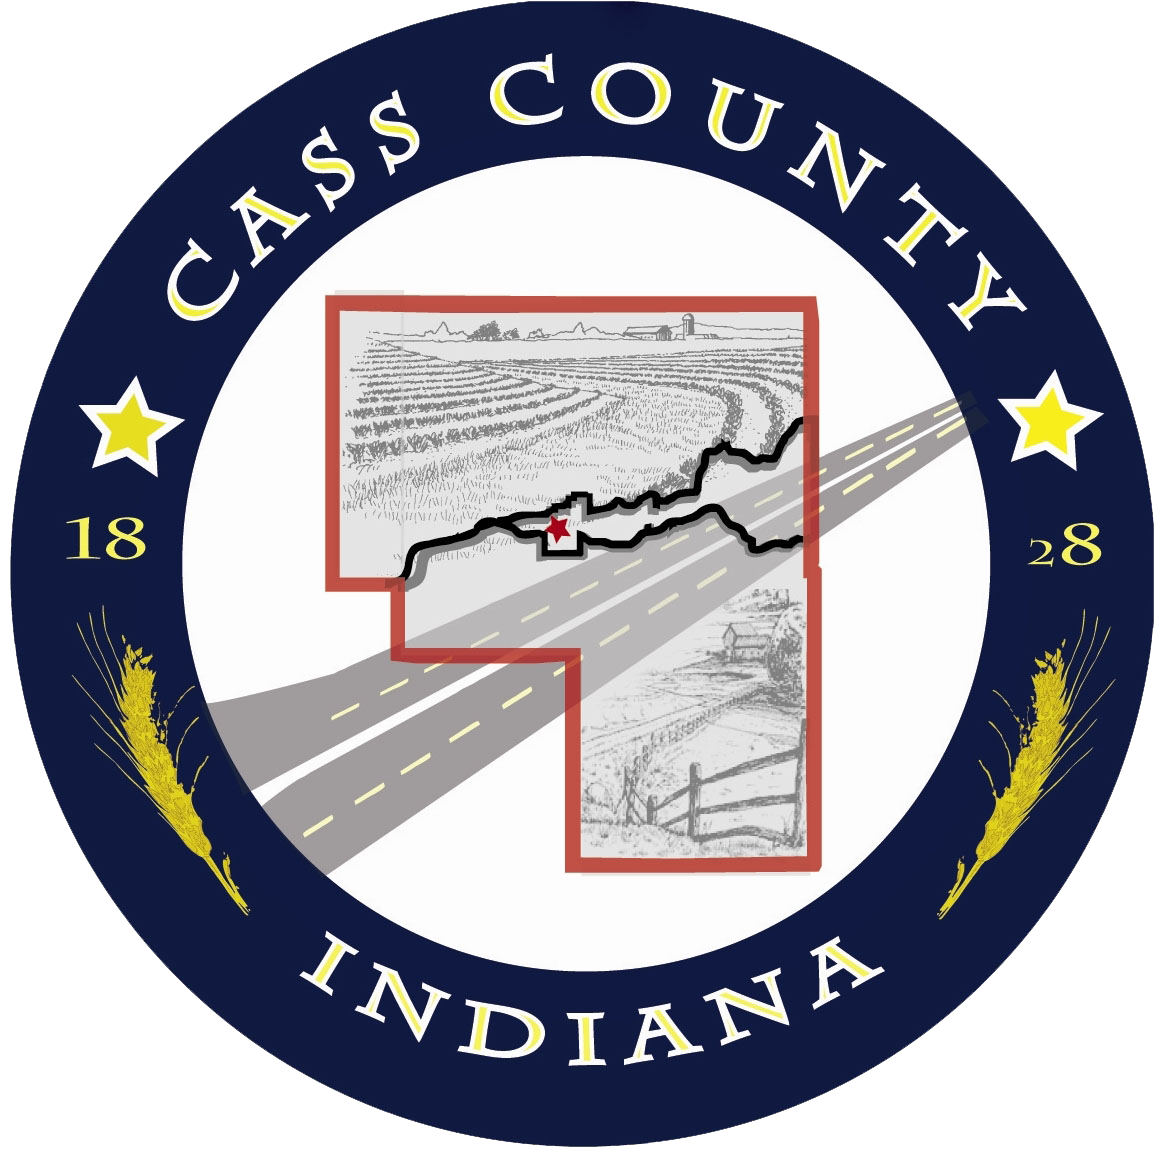 Cass County Indiana